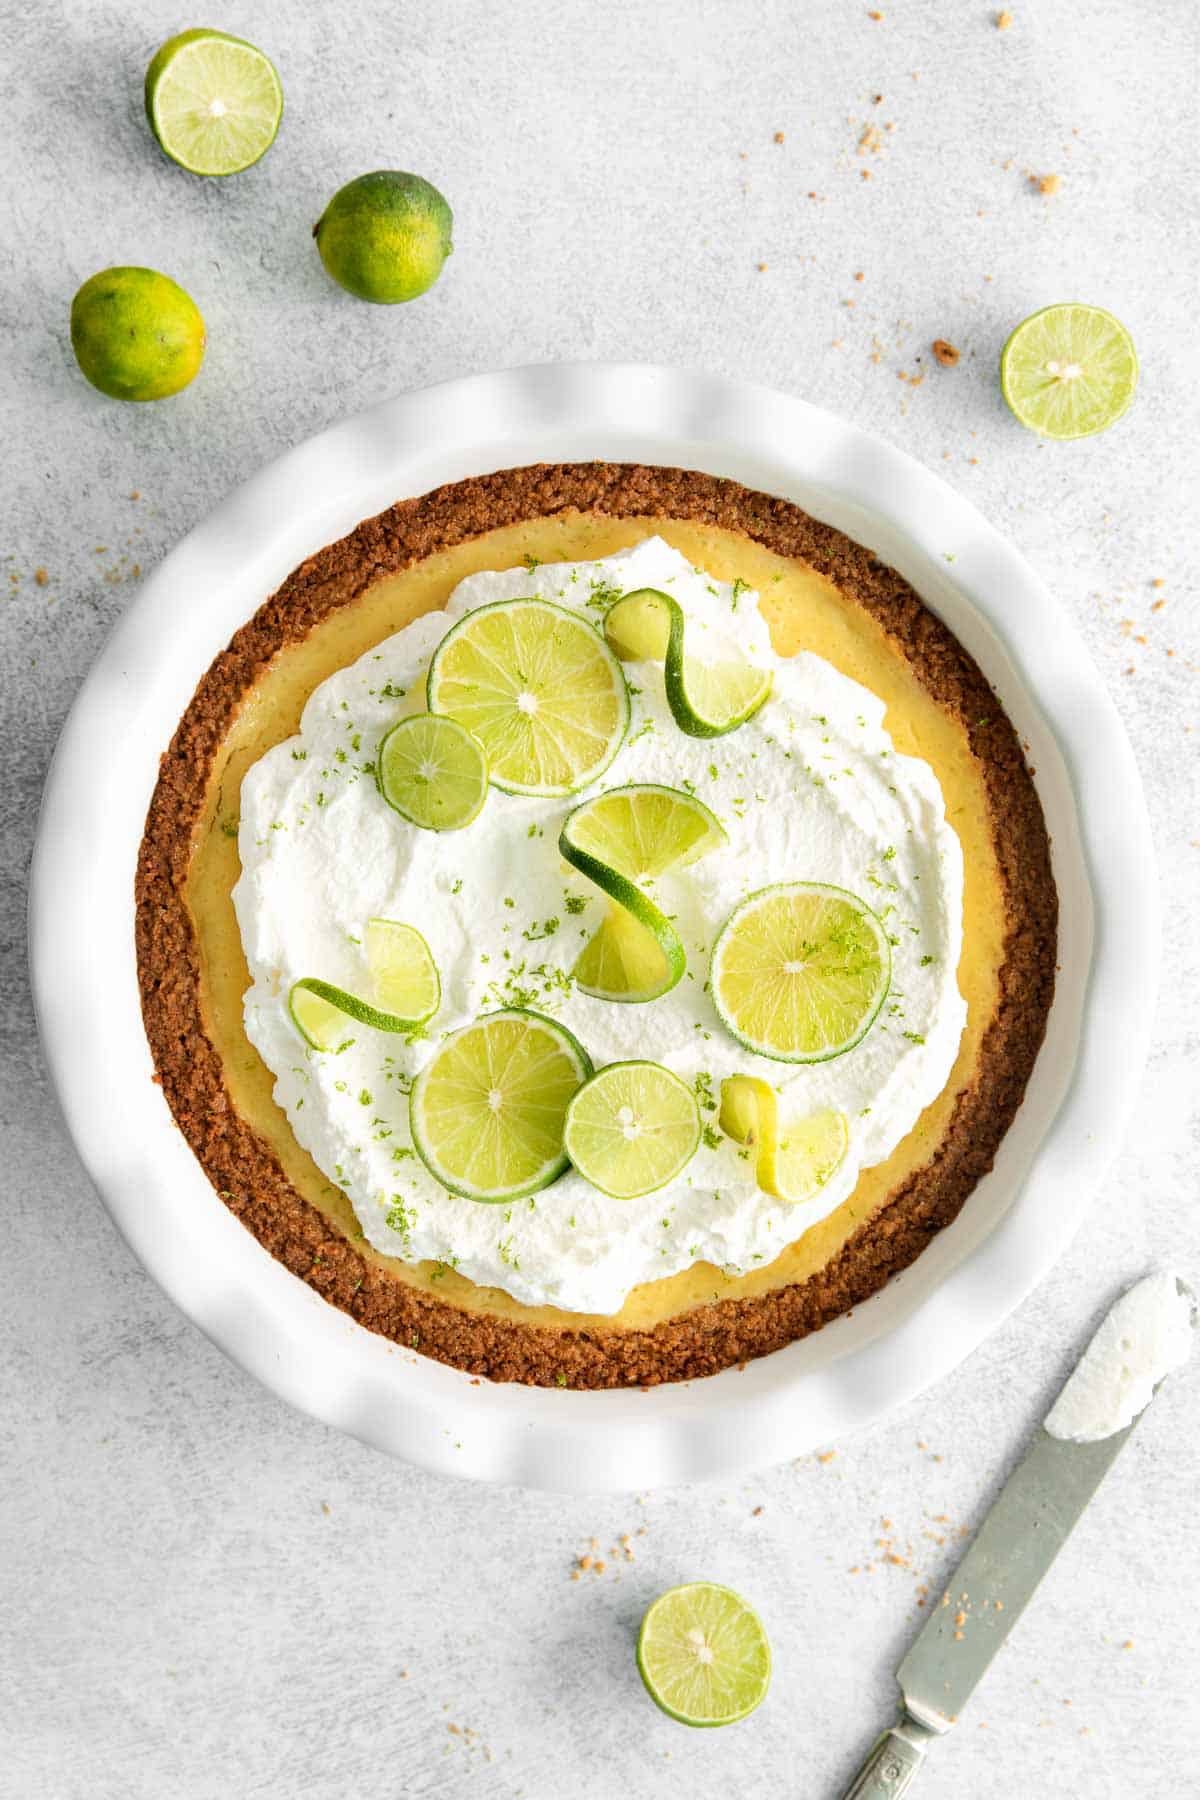 Key lime pie on a countertop, surrounded by fresh limes and a knife